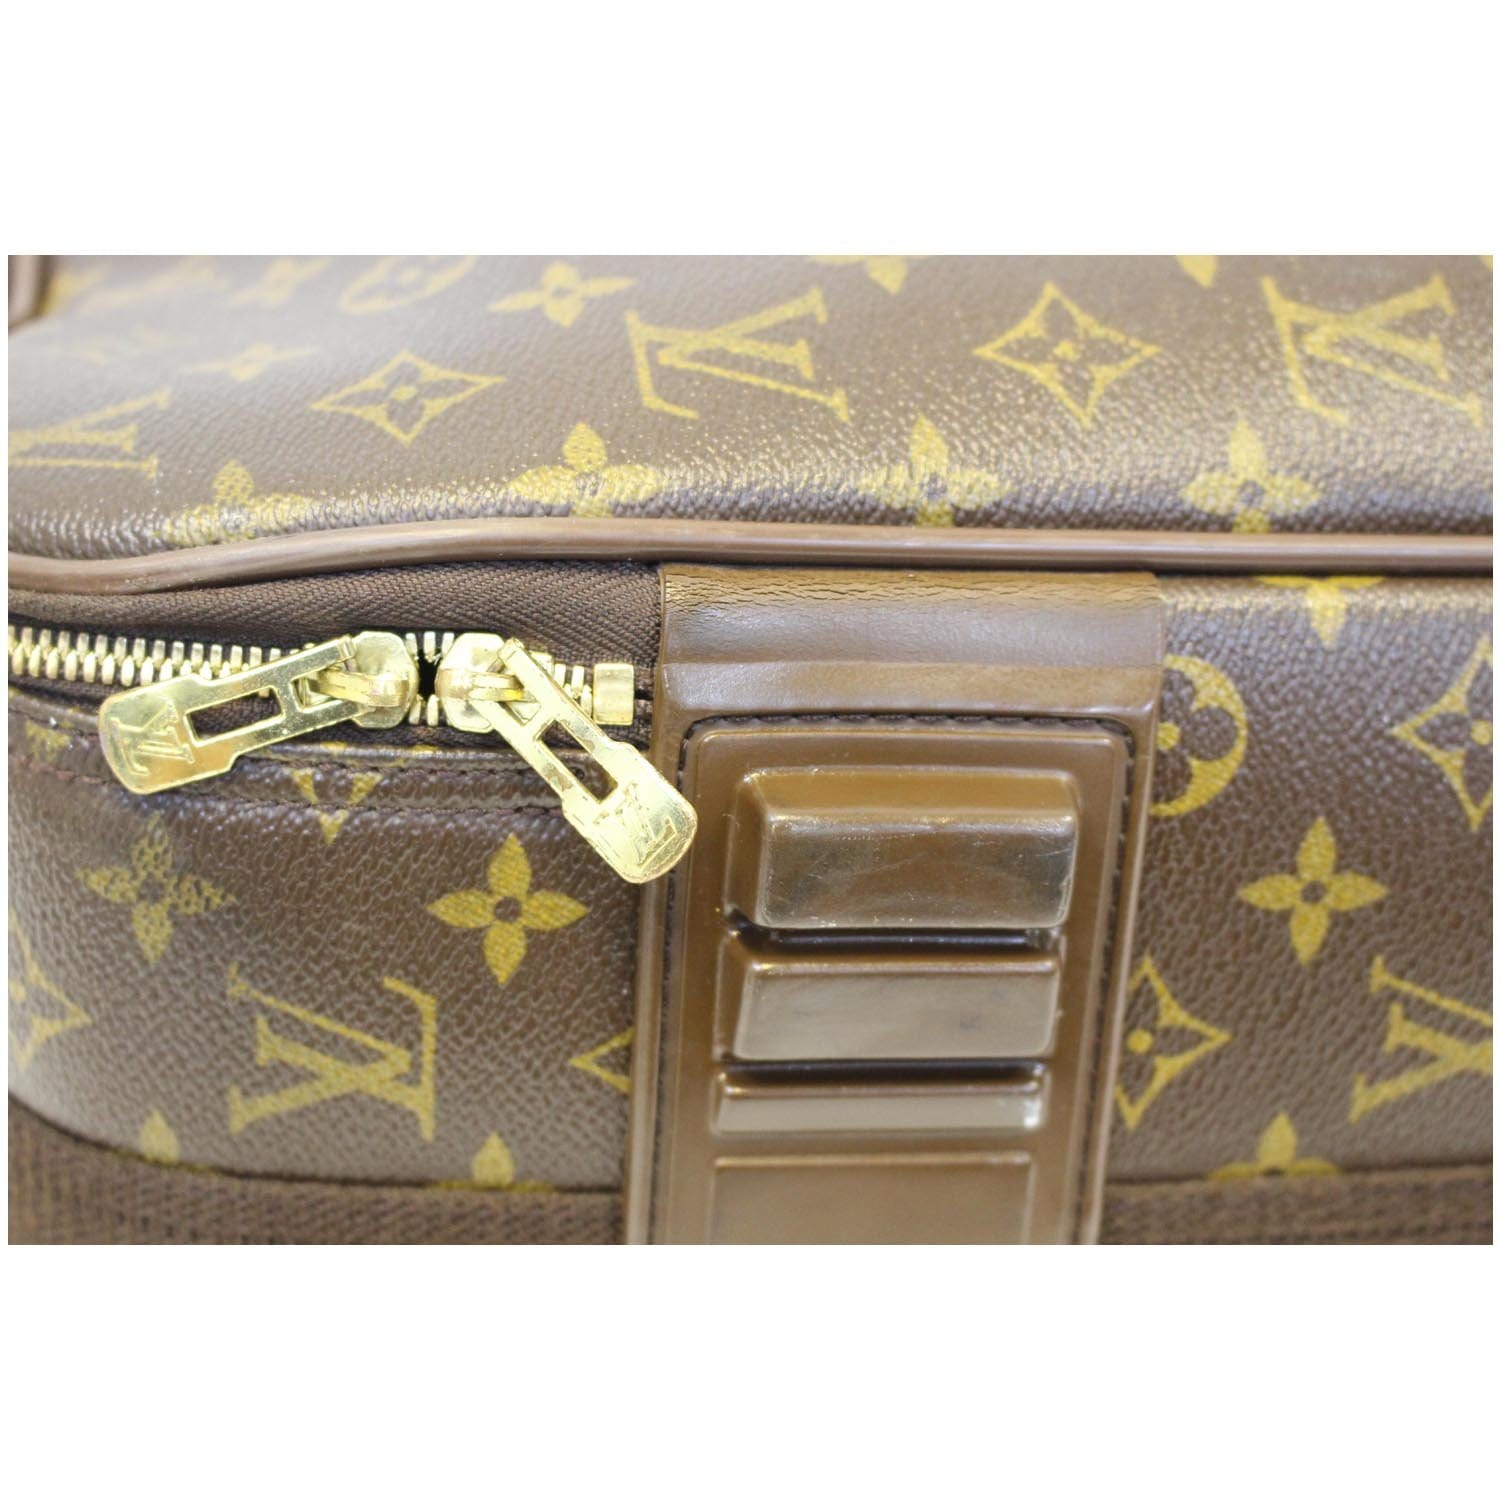 Pegase 55 Business - For Sale on 1stDibs  louis vuitton pegase 55 business,  pegase legère 55 business, louis vuitton suitcase pegase business nm  monogram 55